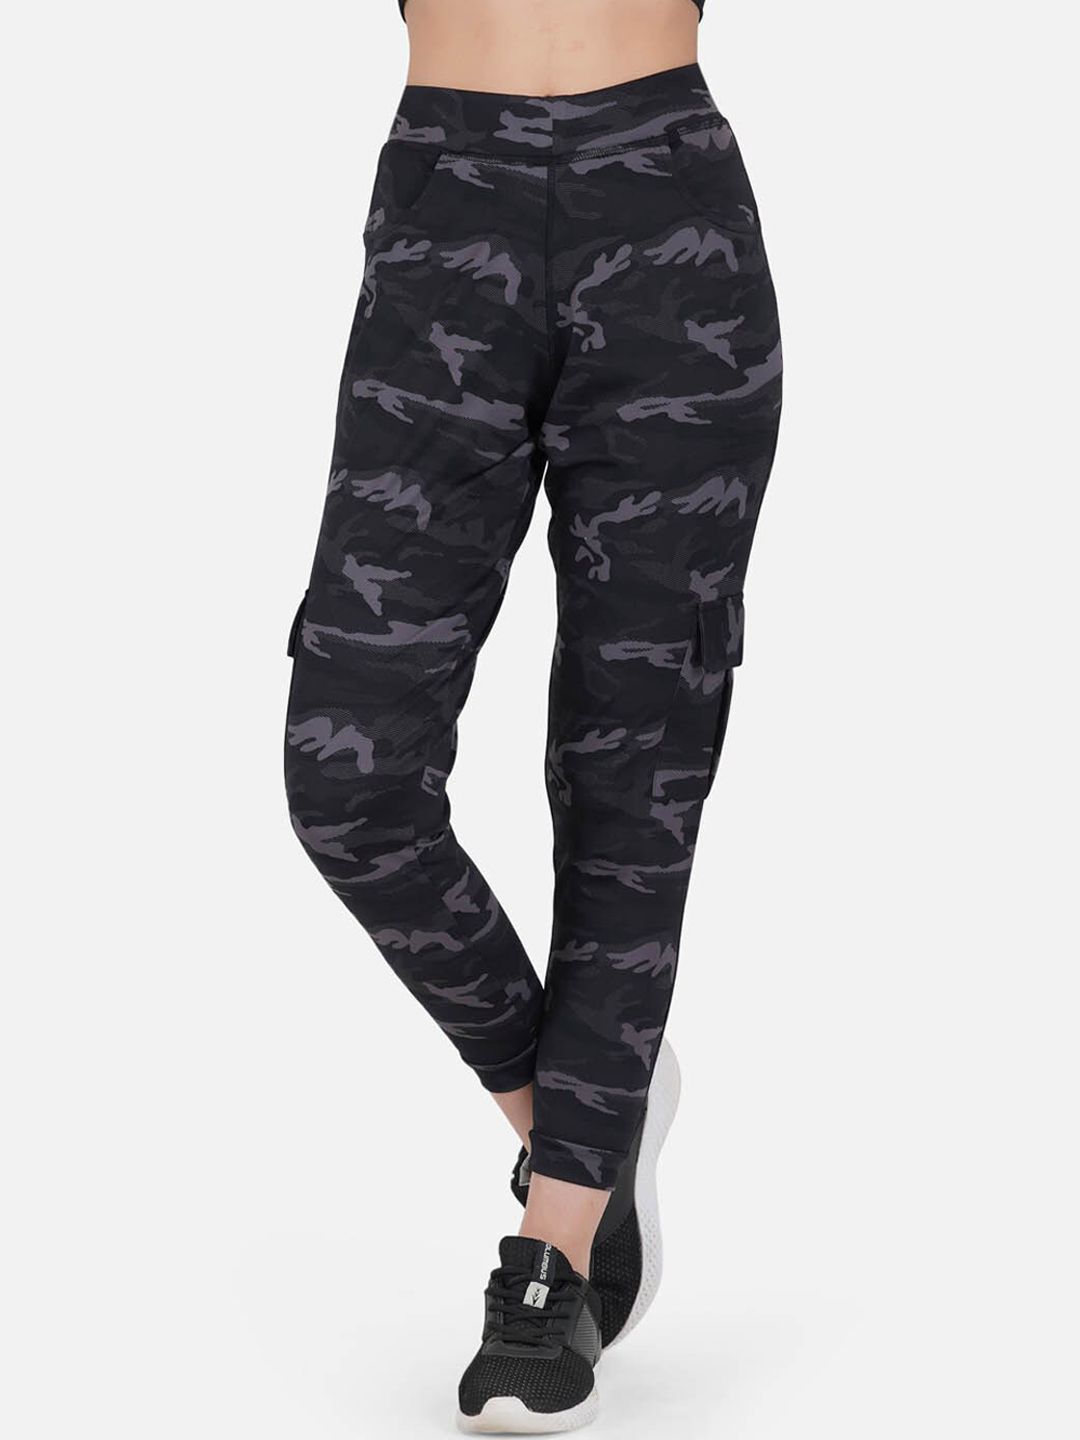 IMPERATIVE Women Black & Grey Camouflage Printed Dry-Fit Joggers Price in India